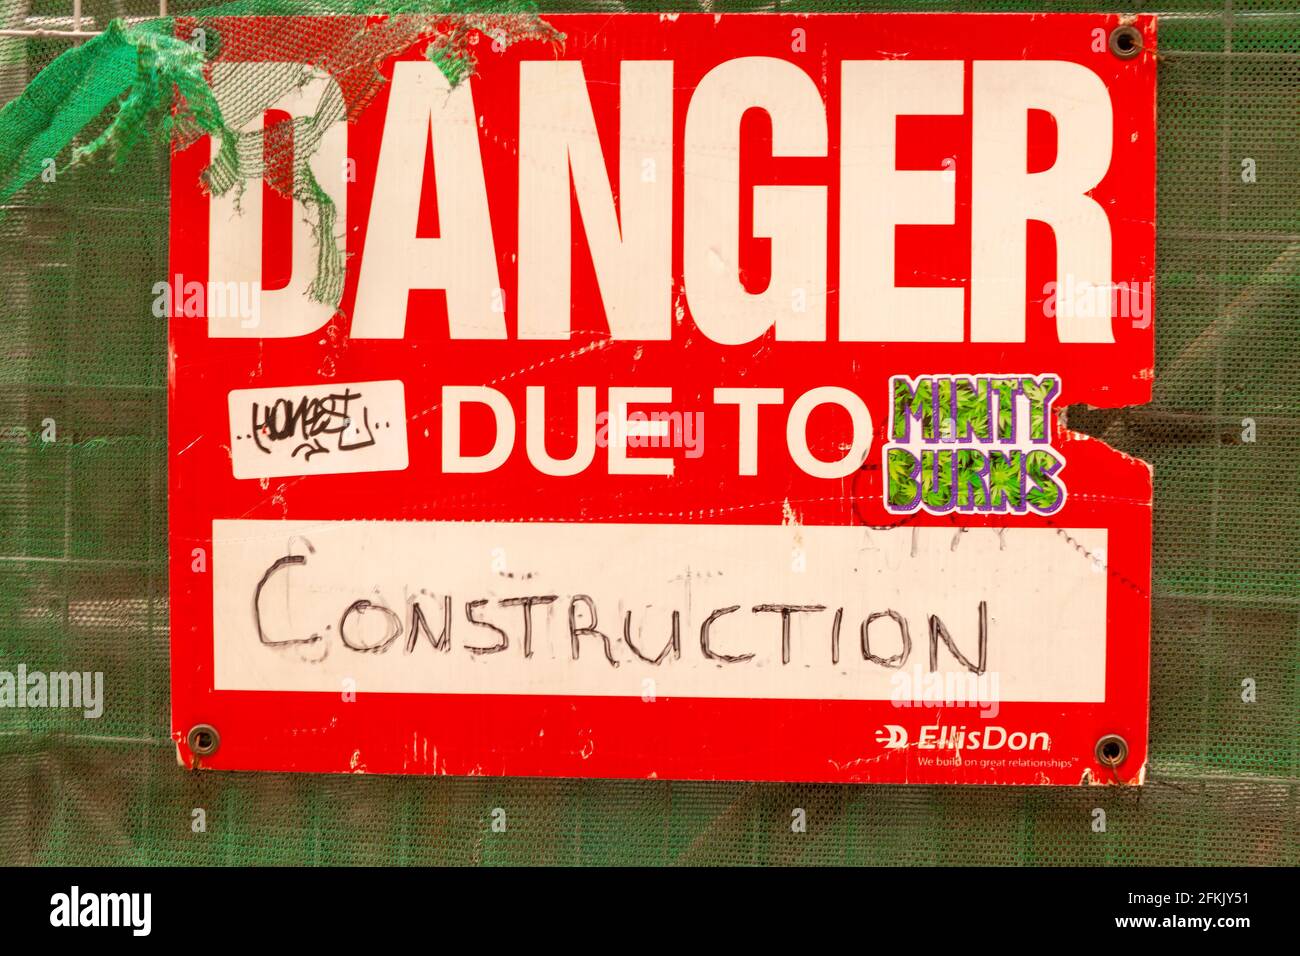 Danger Due To Constrction sign Stock Photo